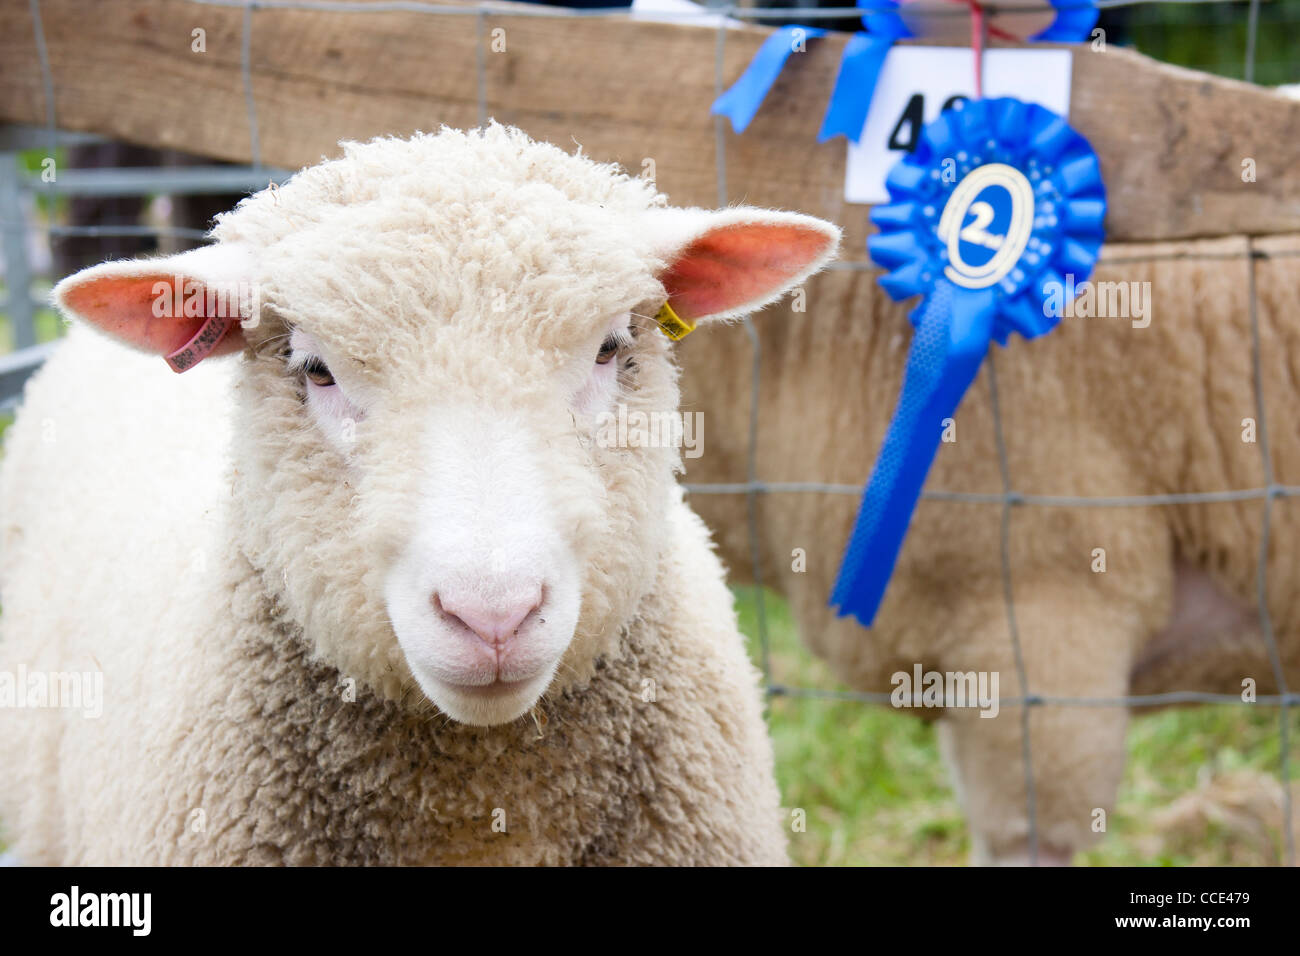 prize winning sheep at agricultural show with rosette Stock Photo